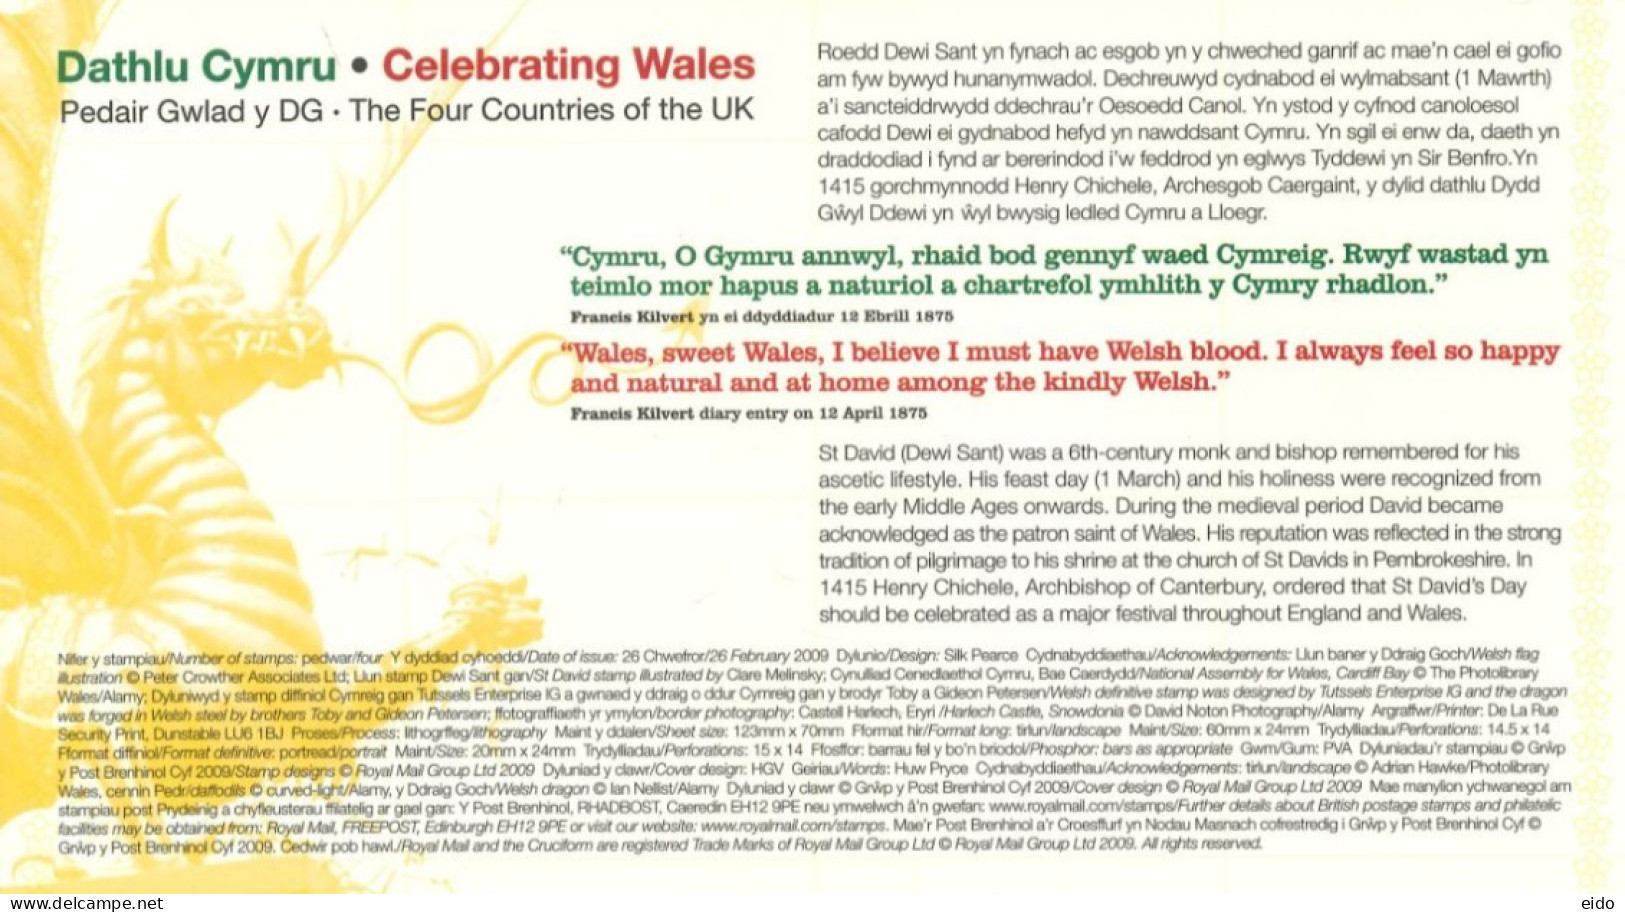 GREAT BRITAIN - 2009, FDC MINIATURE STAMPS SHEET OF DATHLU CYMRU CEEBRATING WALES. - Lettres & Documents